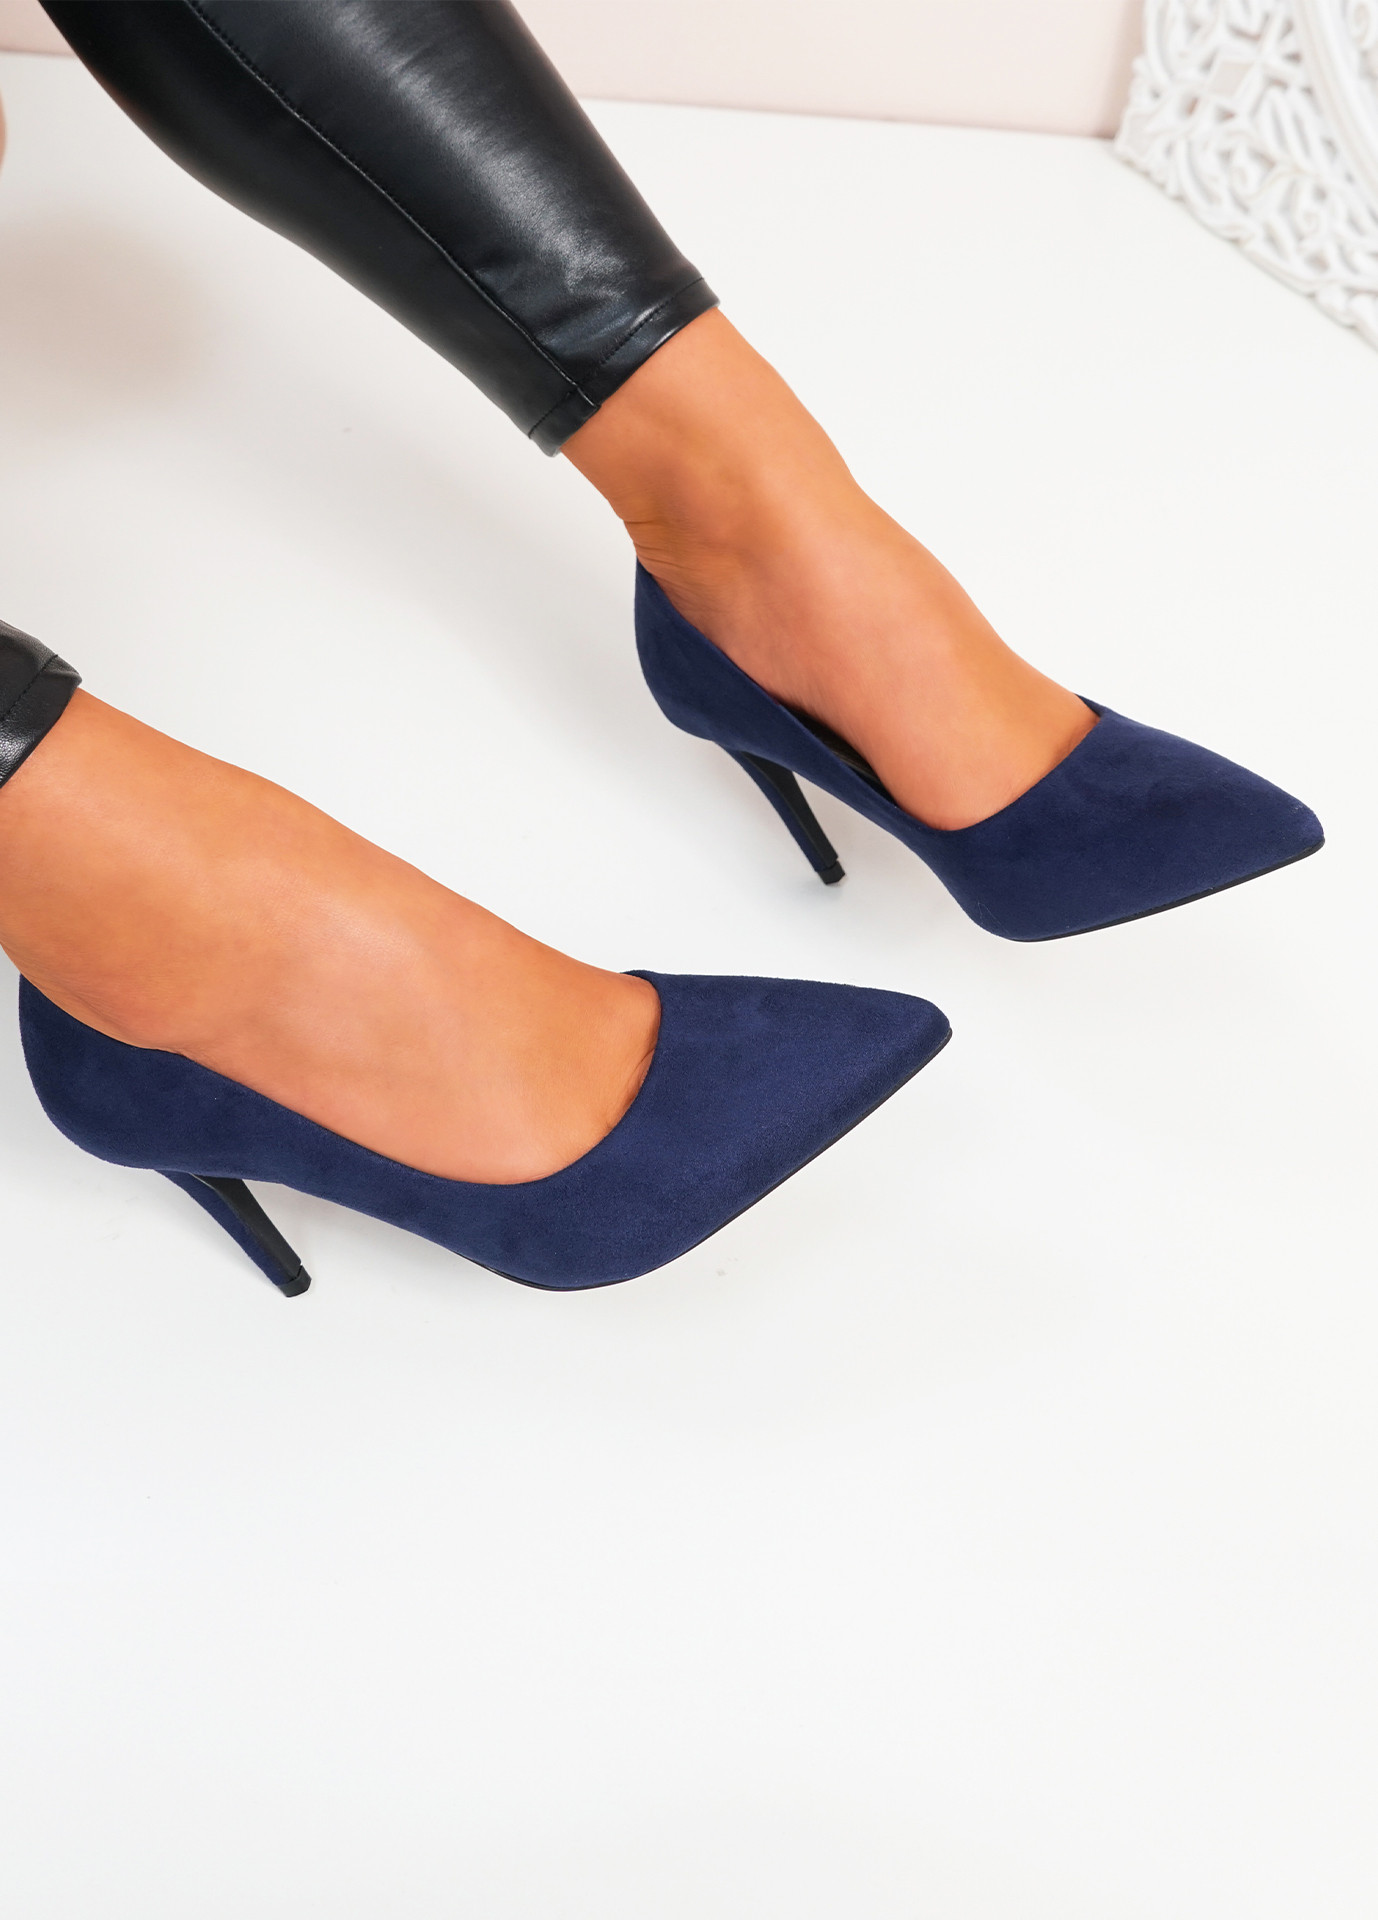 Chic / Beautiful Navy Blue Casual Pumps 2019 Leather 12 cm Stiletto Heels  Pointed Toe Pumps